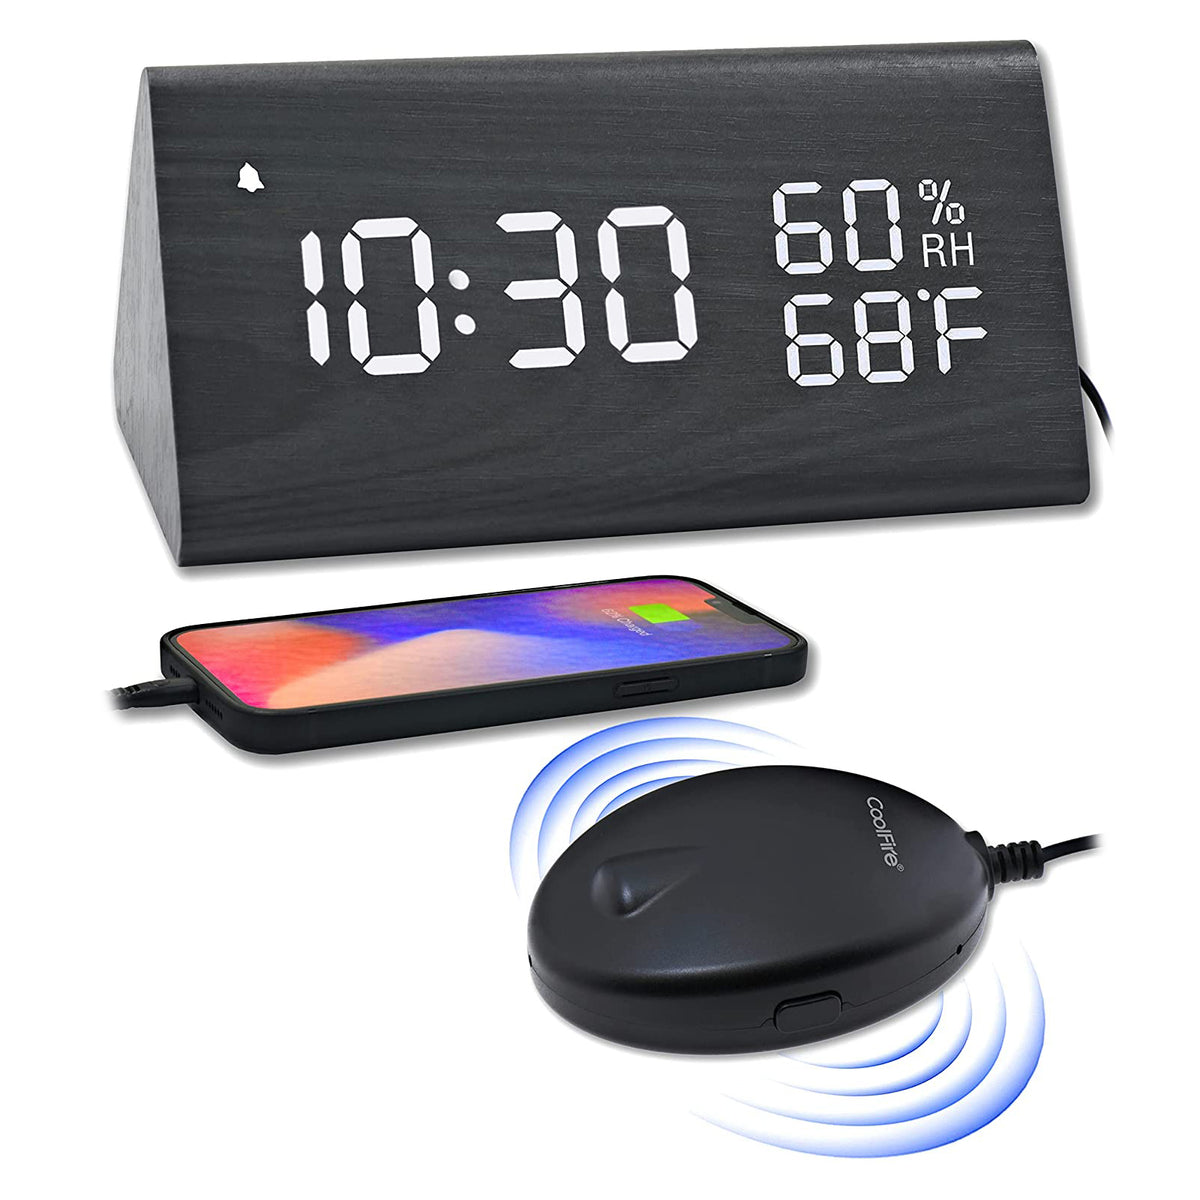 Coolfire Wooden Digital Alarm Clock with Vibrating Bed Shaker